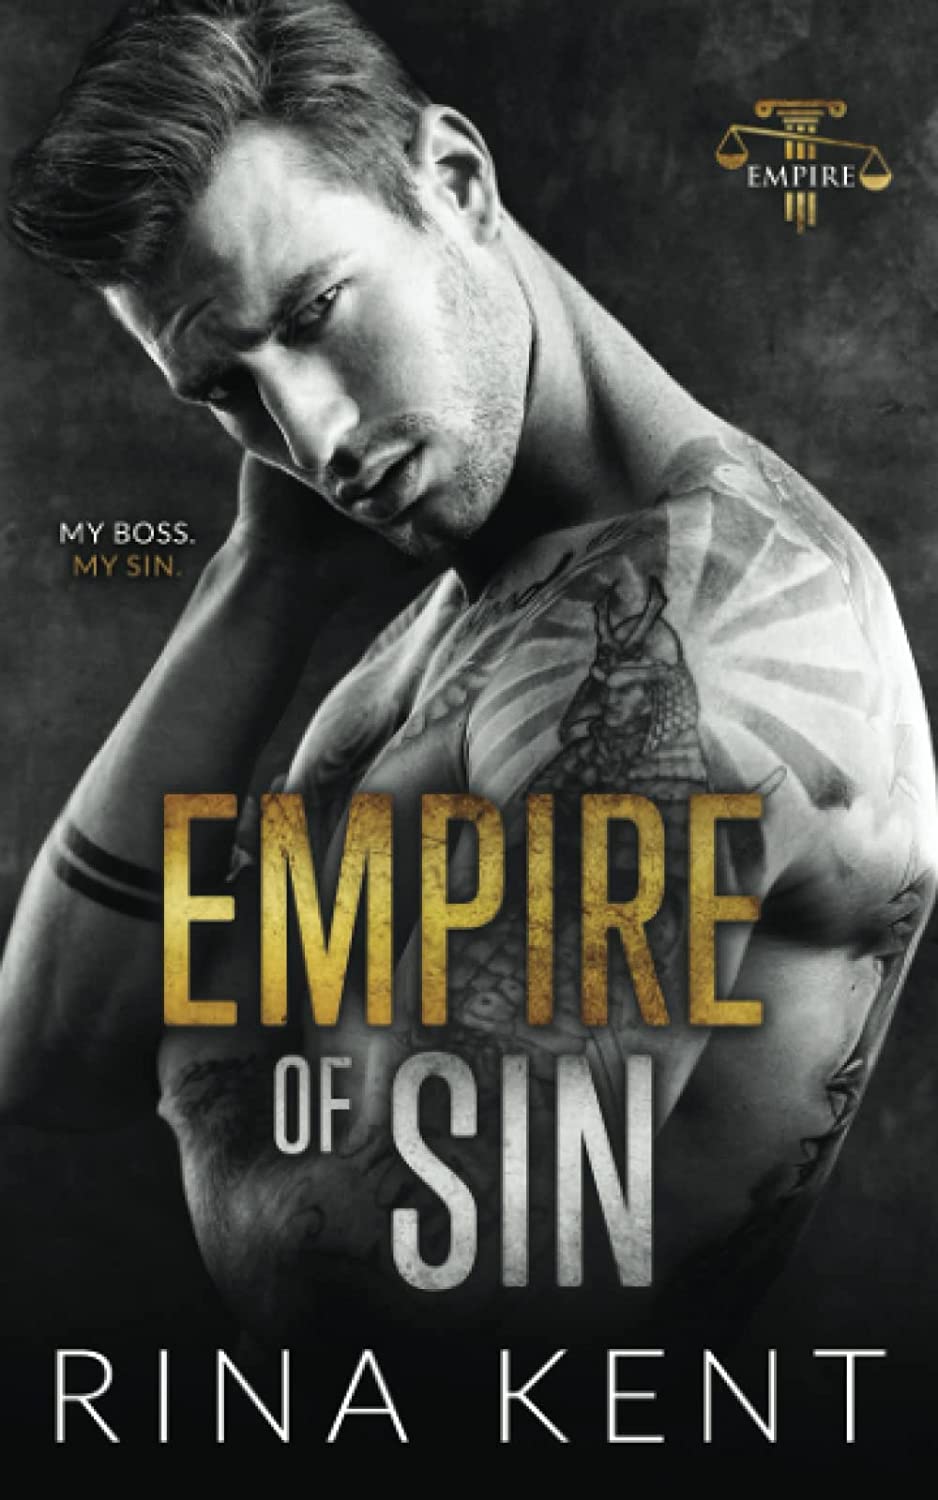 Empire Series by Rina Kent